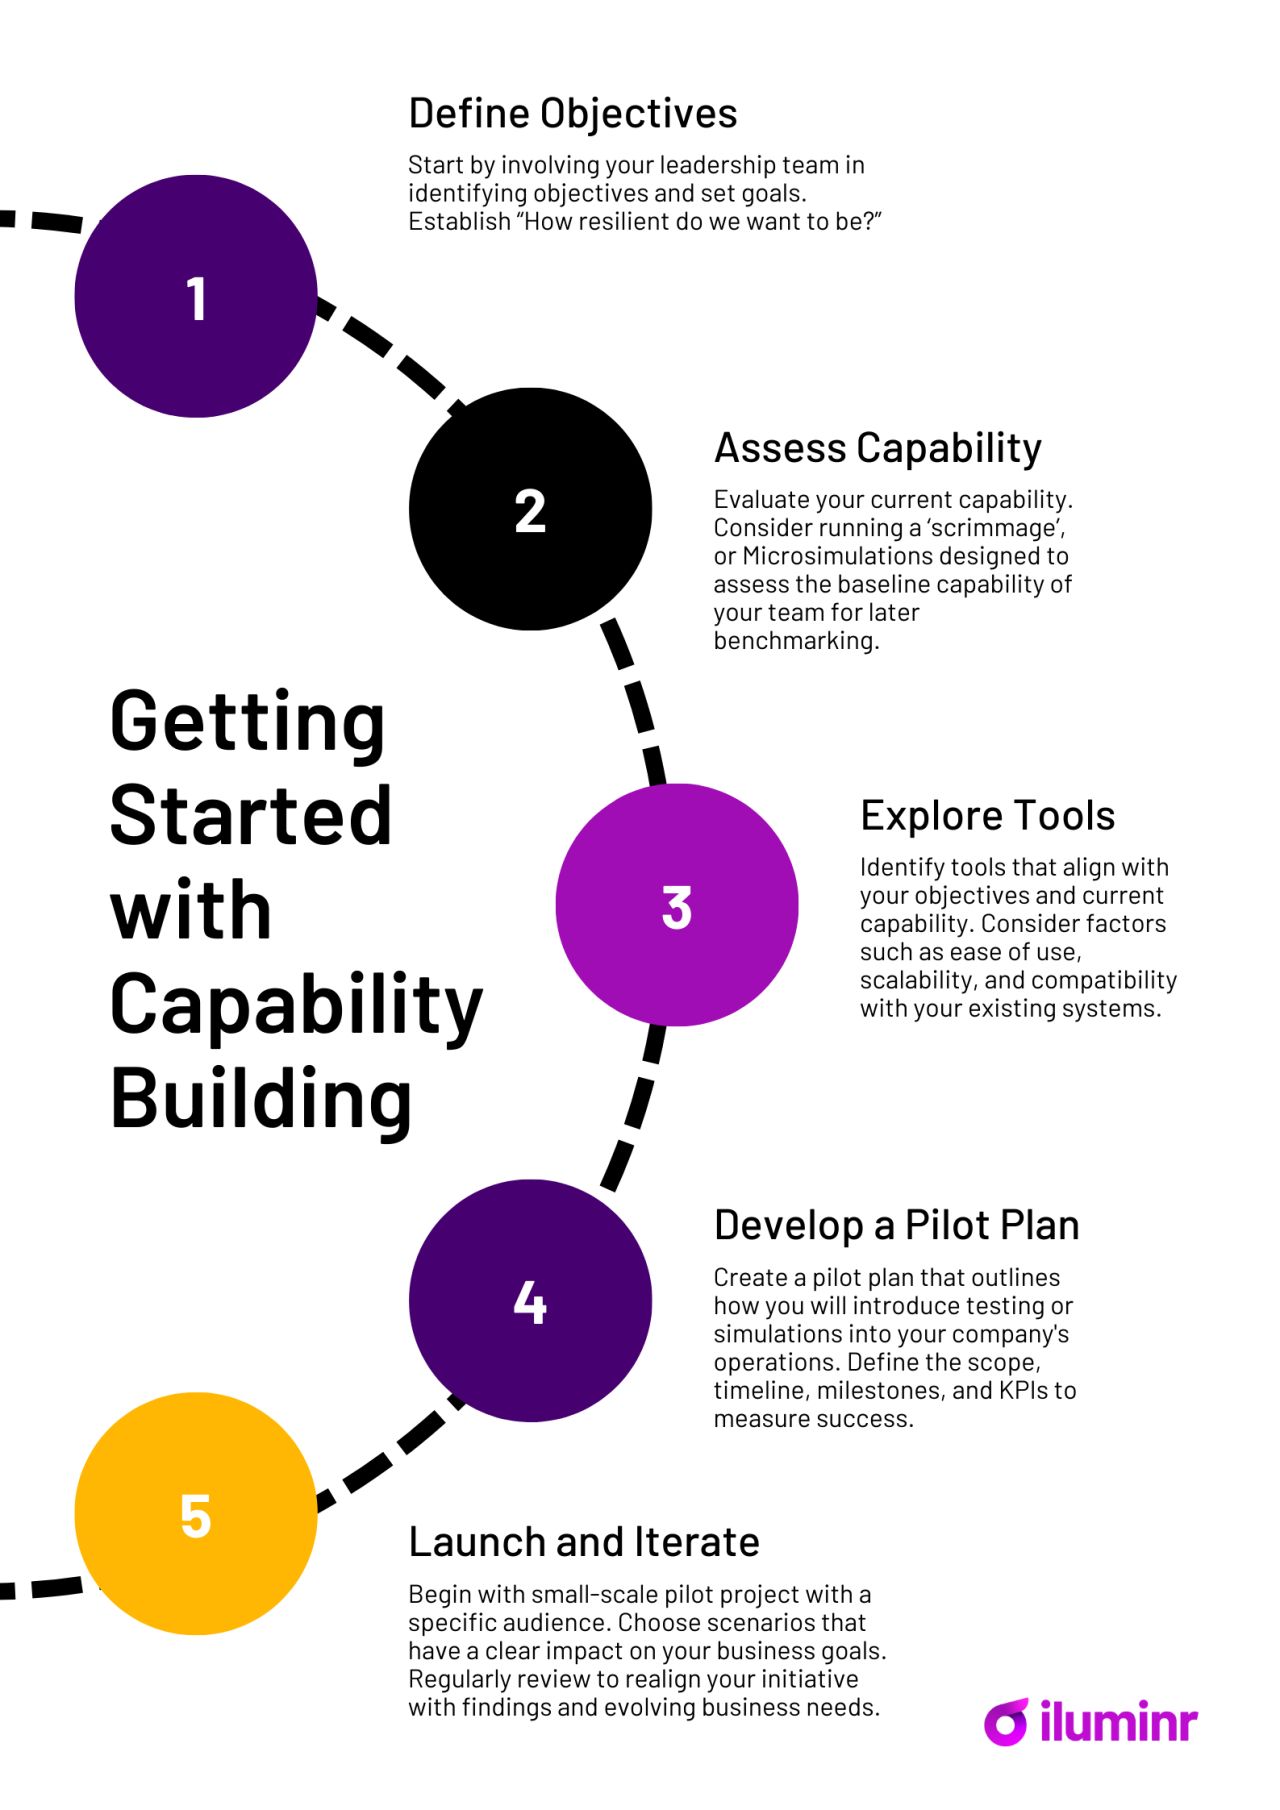 5 steps to capability building